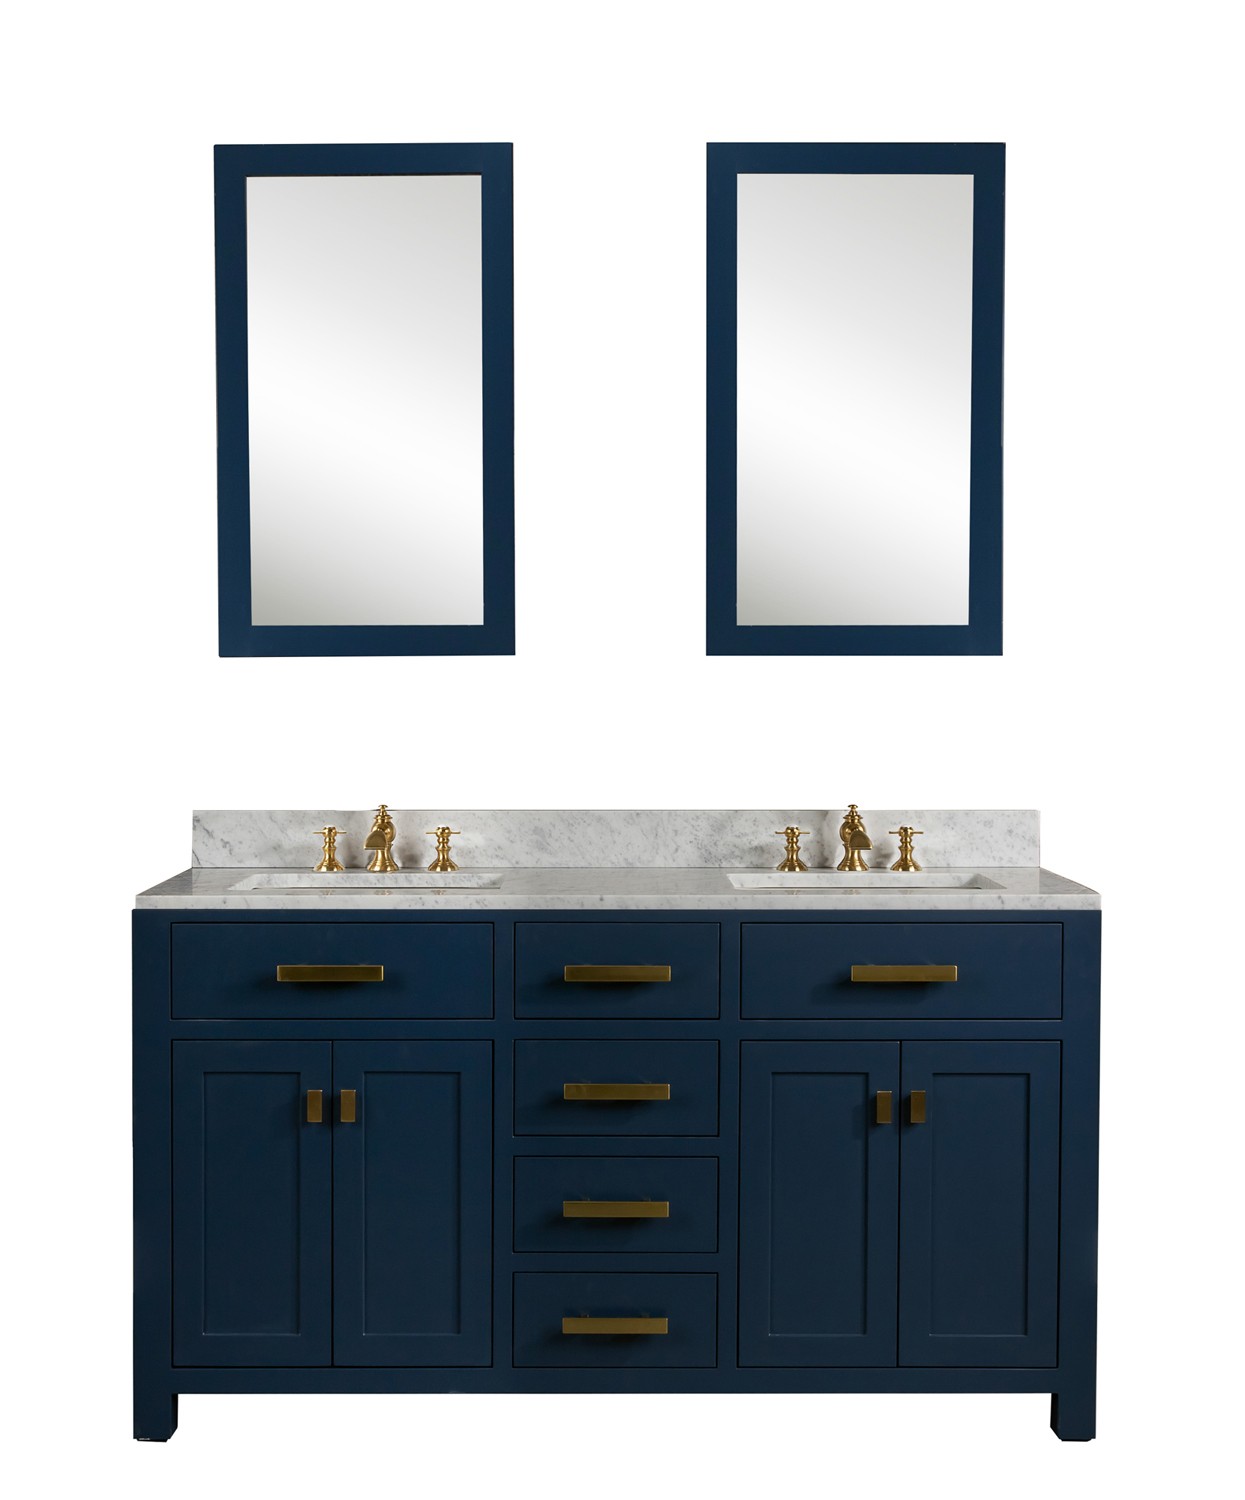 Madison 60-Inch Double Sink Carrara White Marble Vanity In Monarch BlueWith F2-0013-06-FX Lavatory Faucet(s)